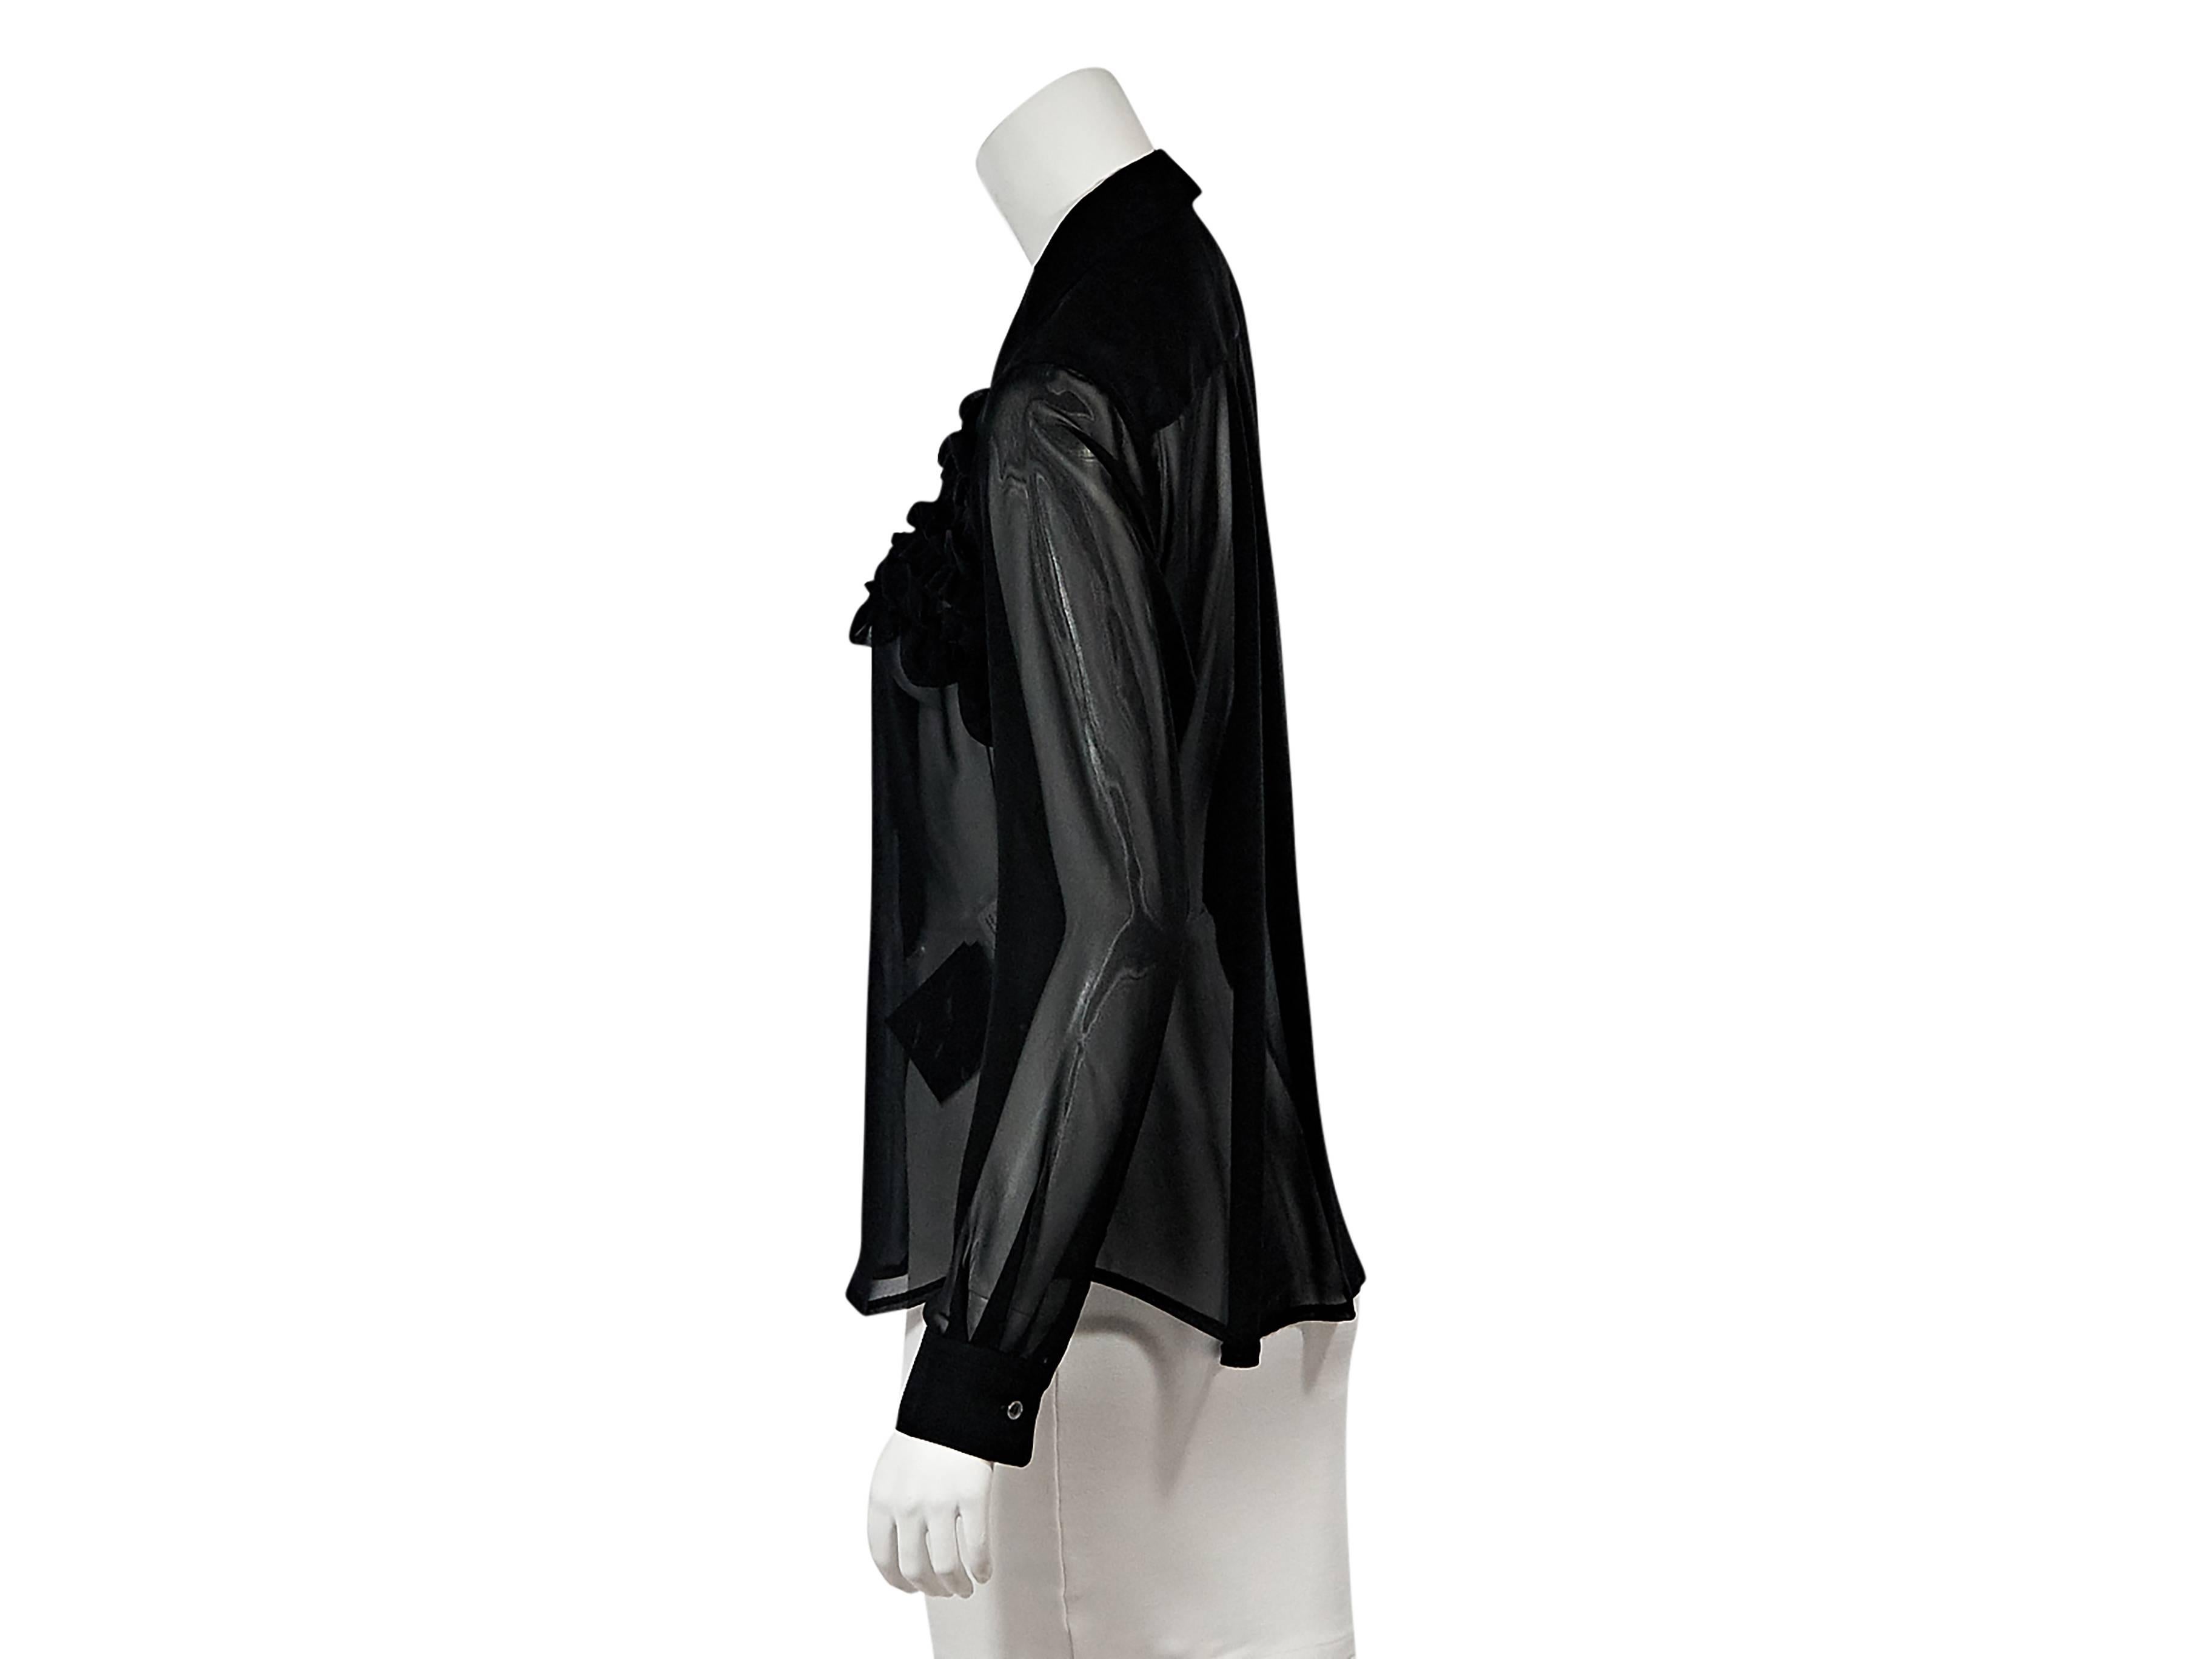 Product details:  Black sheer ruffle-trimmed blouse by Comme des Garcons.  Peter pan collar.  Button-front closure.  Single button closure.  Size L
Condition: Pre-owned. New with tags.

Est. Retail $ 1,245.00
